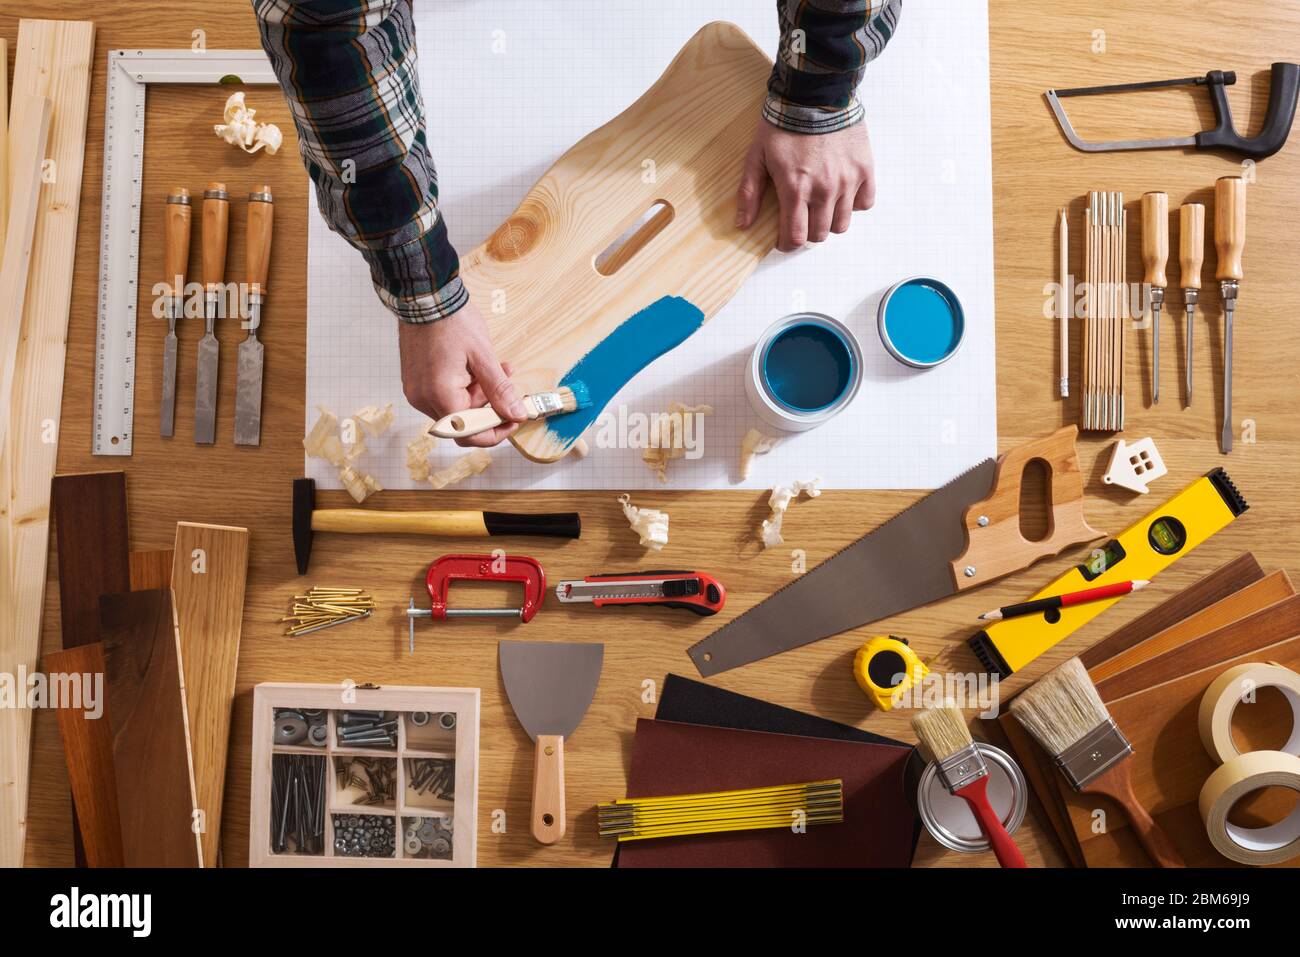 Decorator varnishing a wooden stool with a blue coating on a work table with DIY tools all around, top view Stock Photo